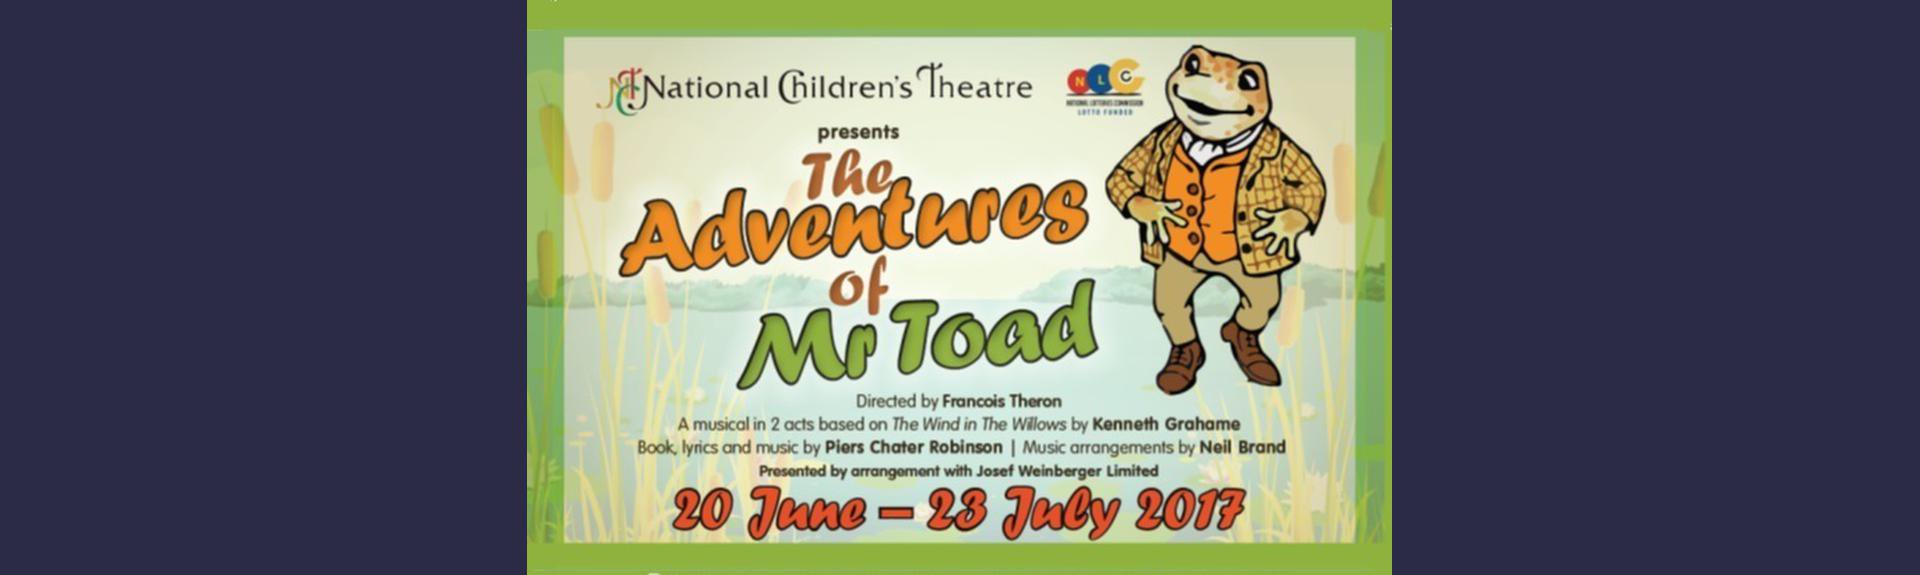 The Adventures of Mr Toad